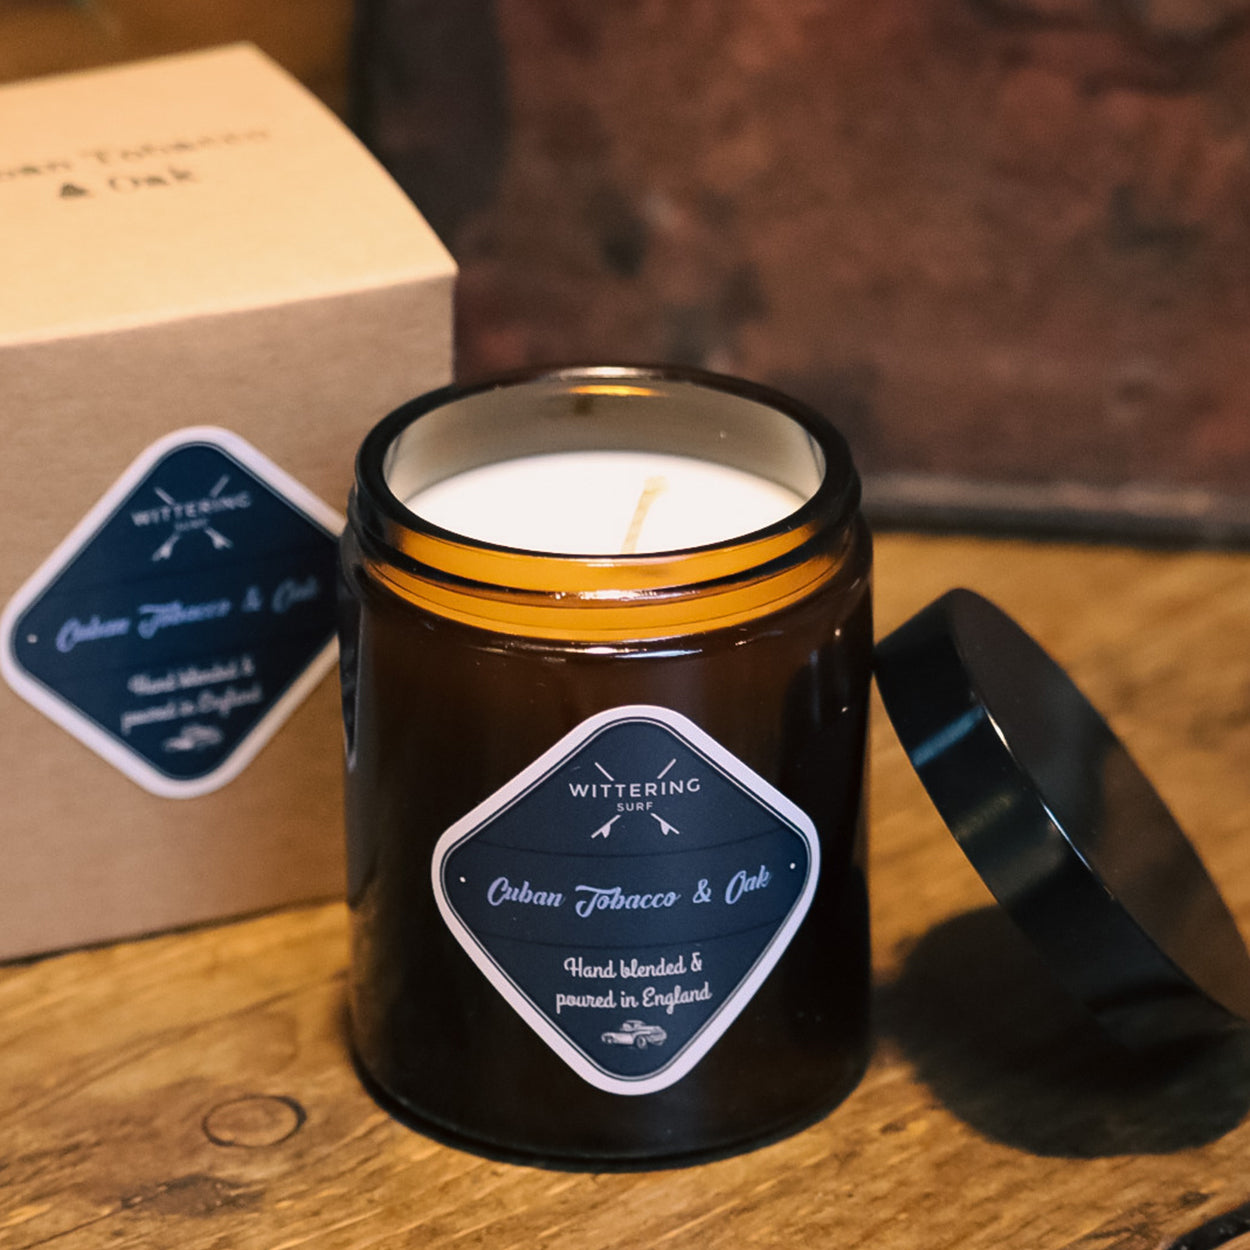 HAND POURED SOY CANDLE - CUBAN TOBACCO & OAK - Wittering Surf Shop